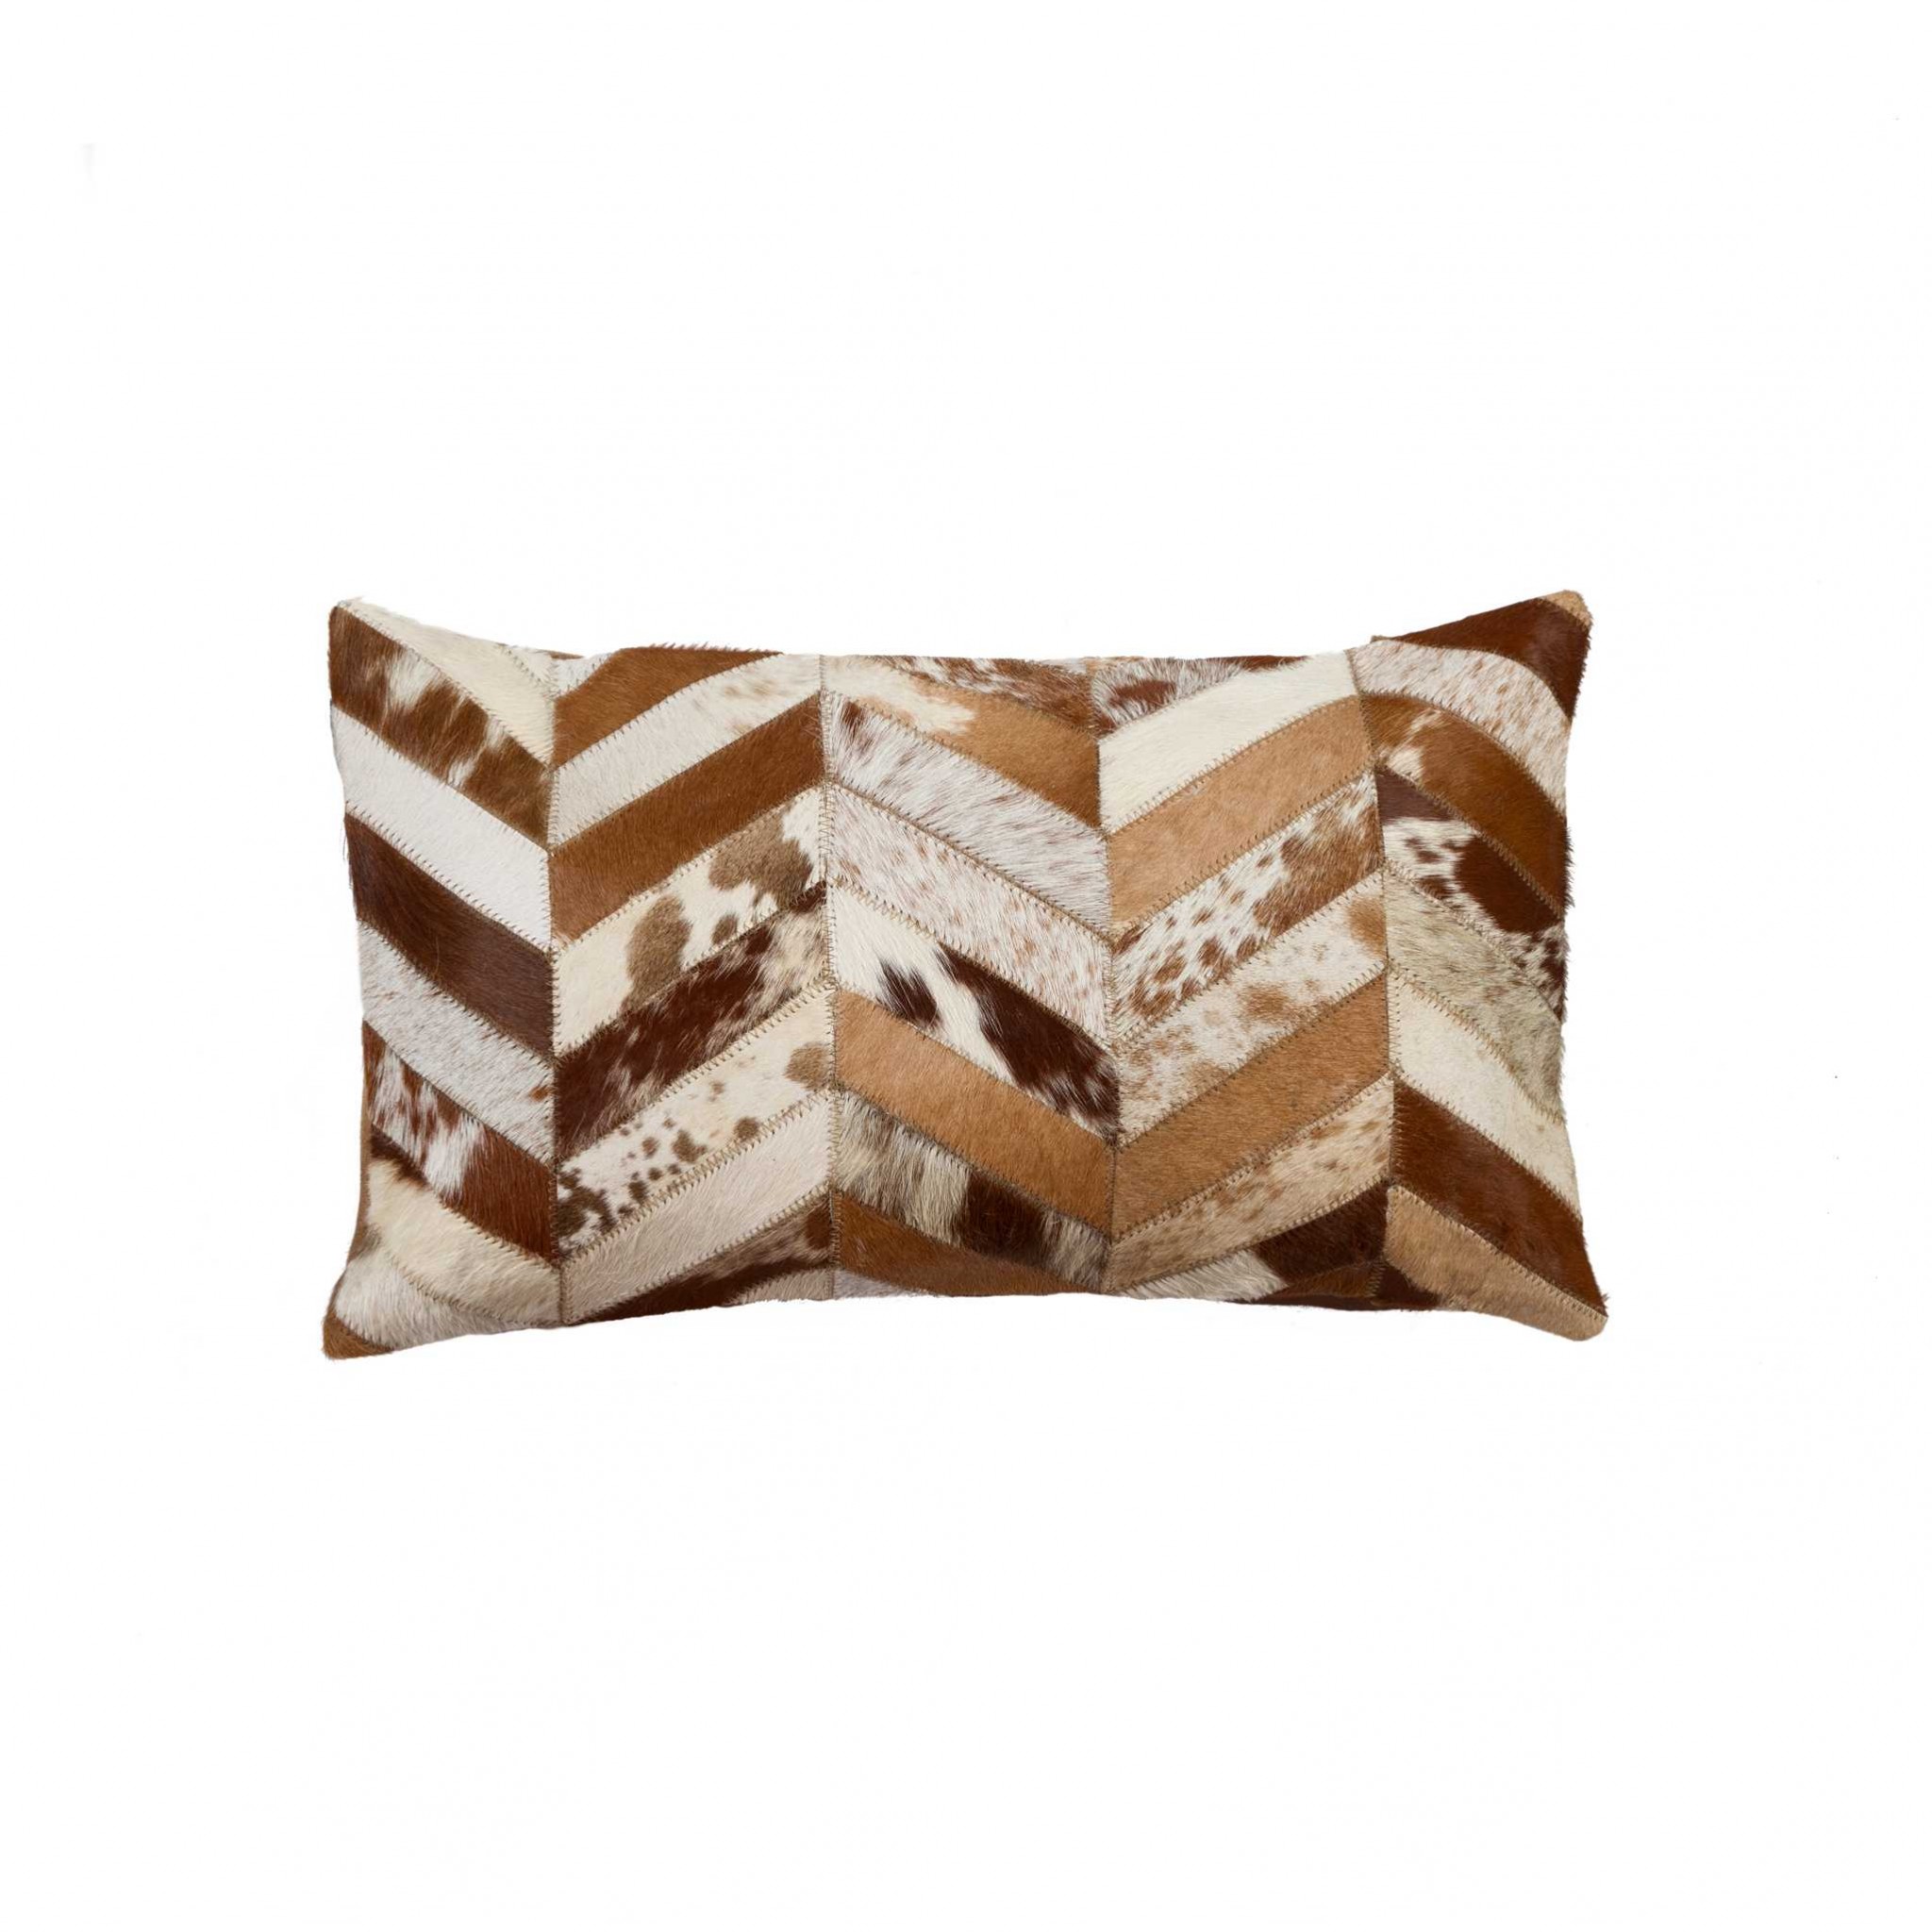 12" x 20" x 5" Brown And Natural - Pillow